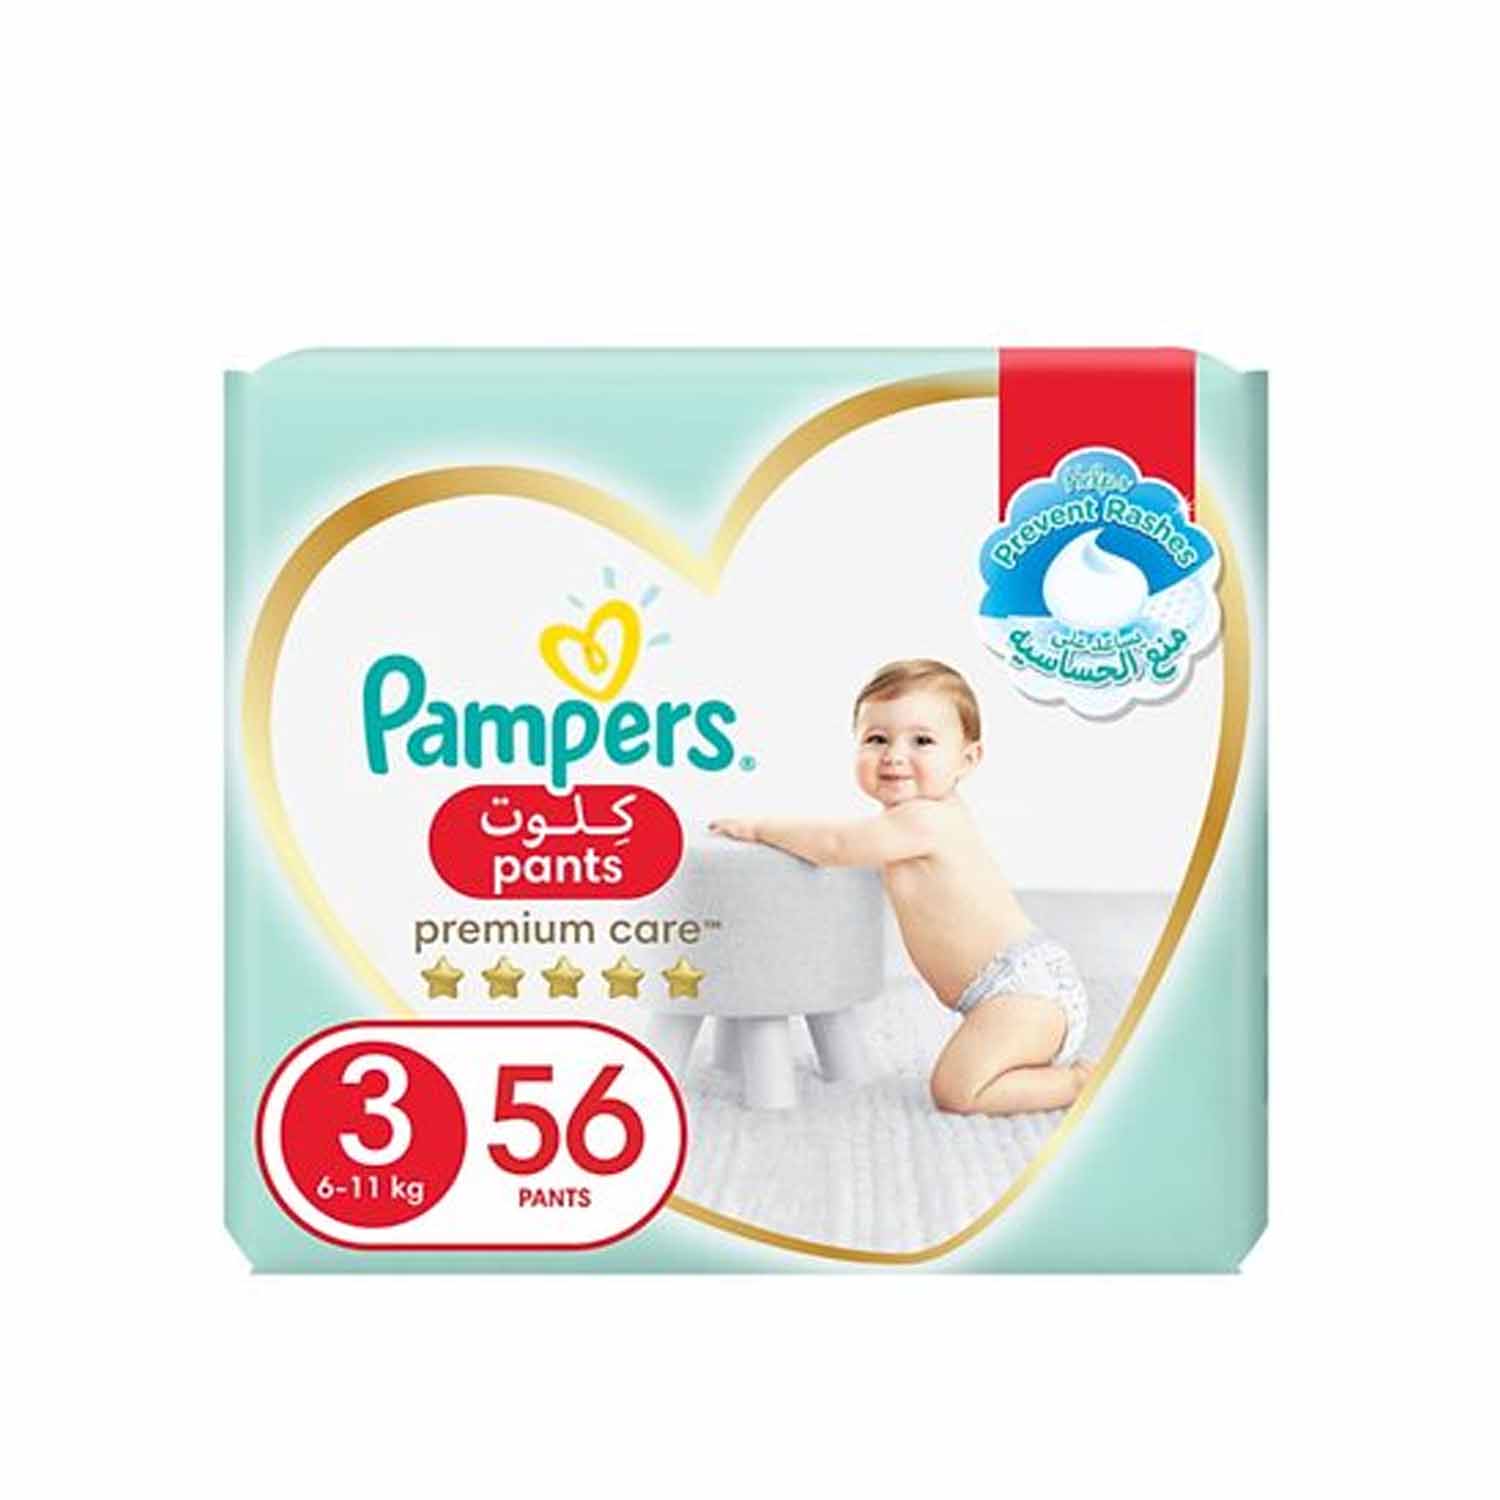 Pampers - Premium protection couches taille 0 <3 kg (24 pièces), Delivery  Near You